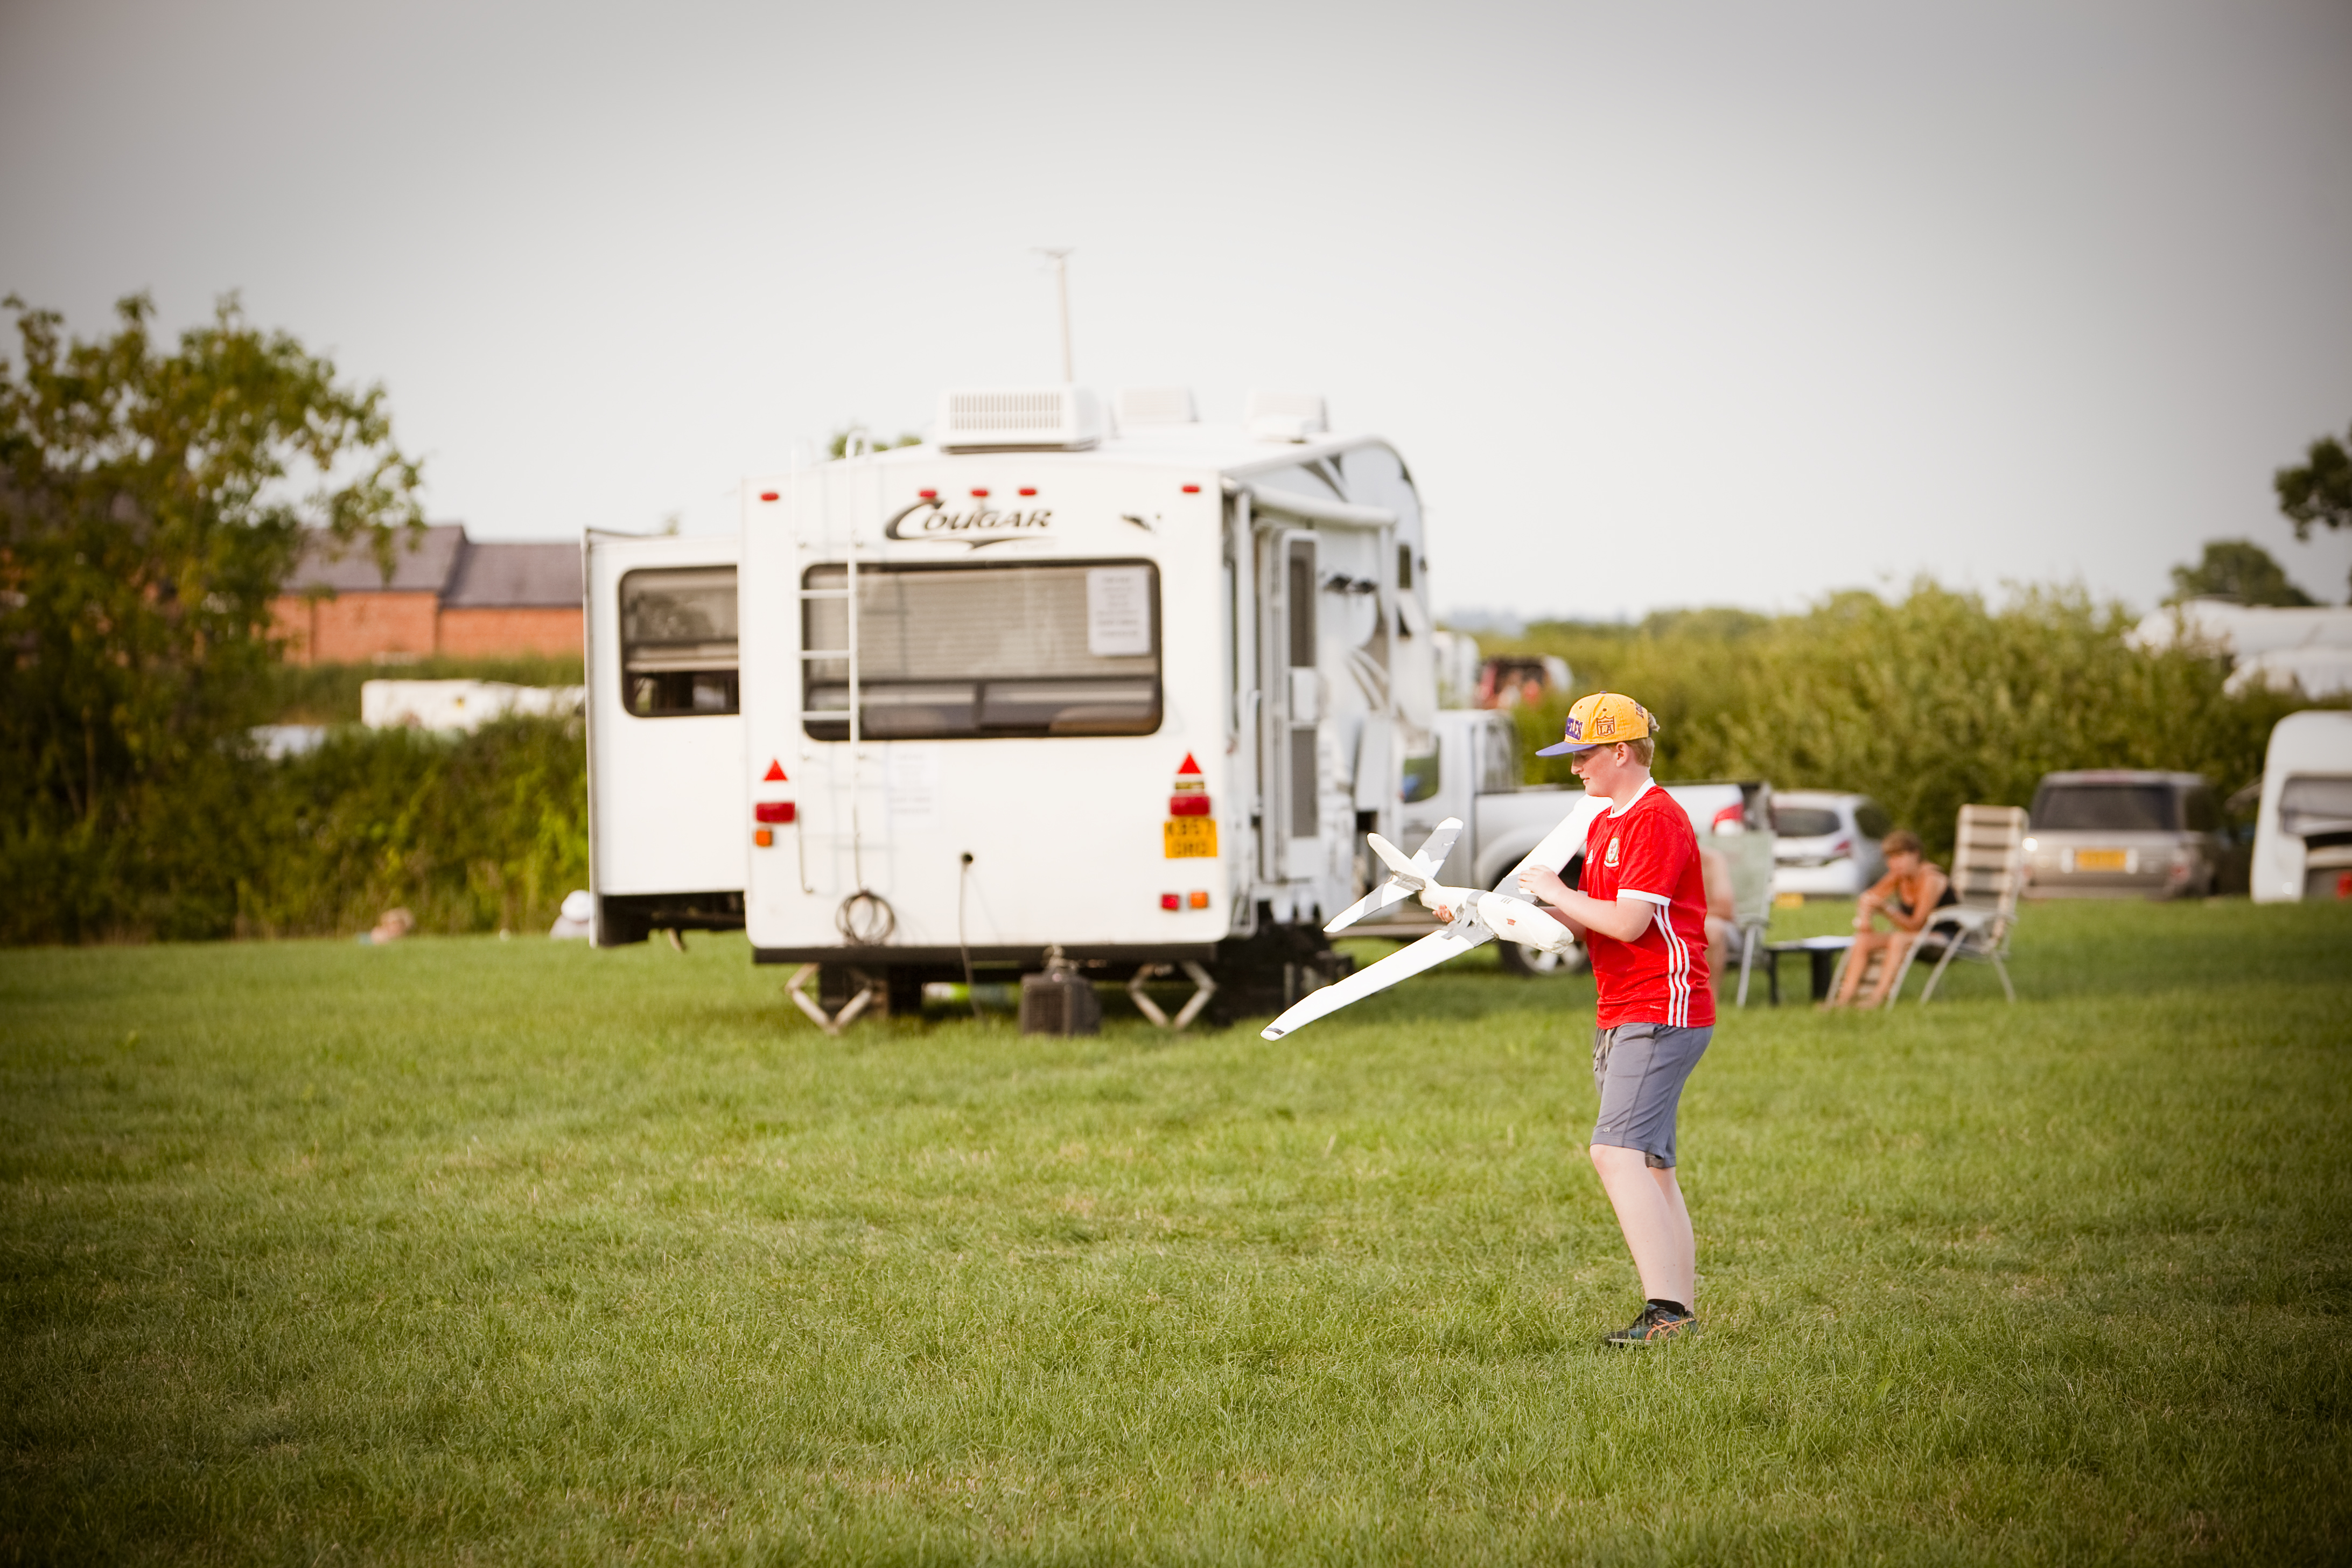 Pitch and Canvas | Glamping and Camping in Cheshire | boy playing with plane